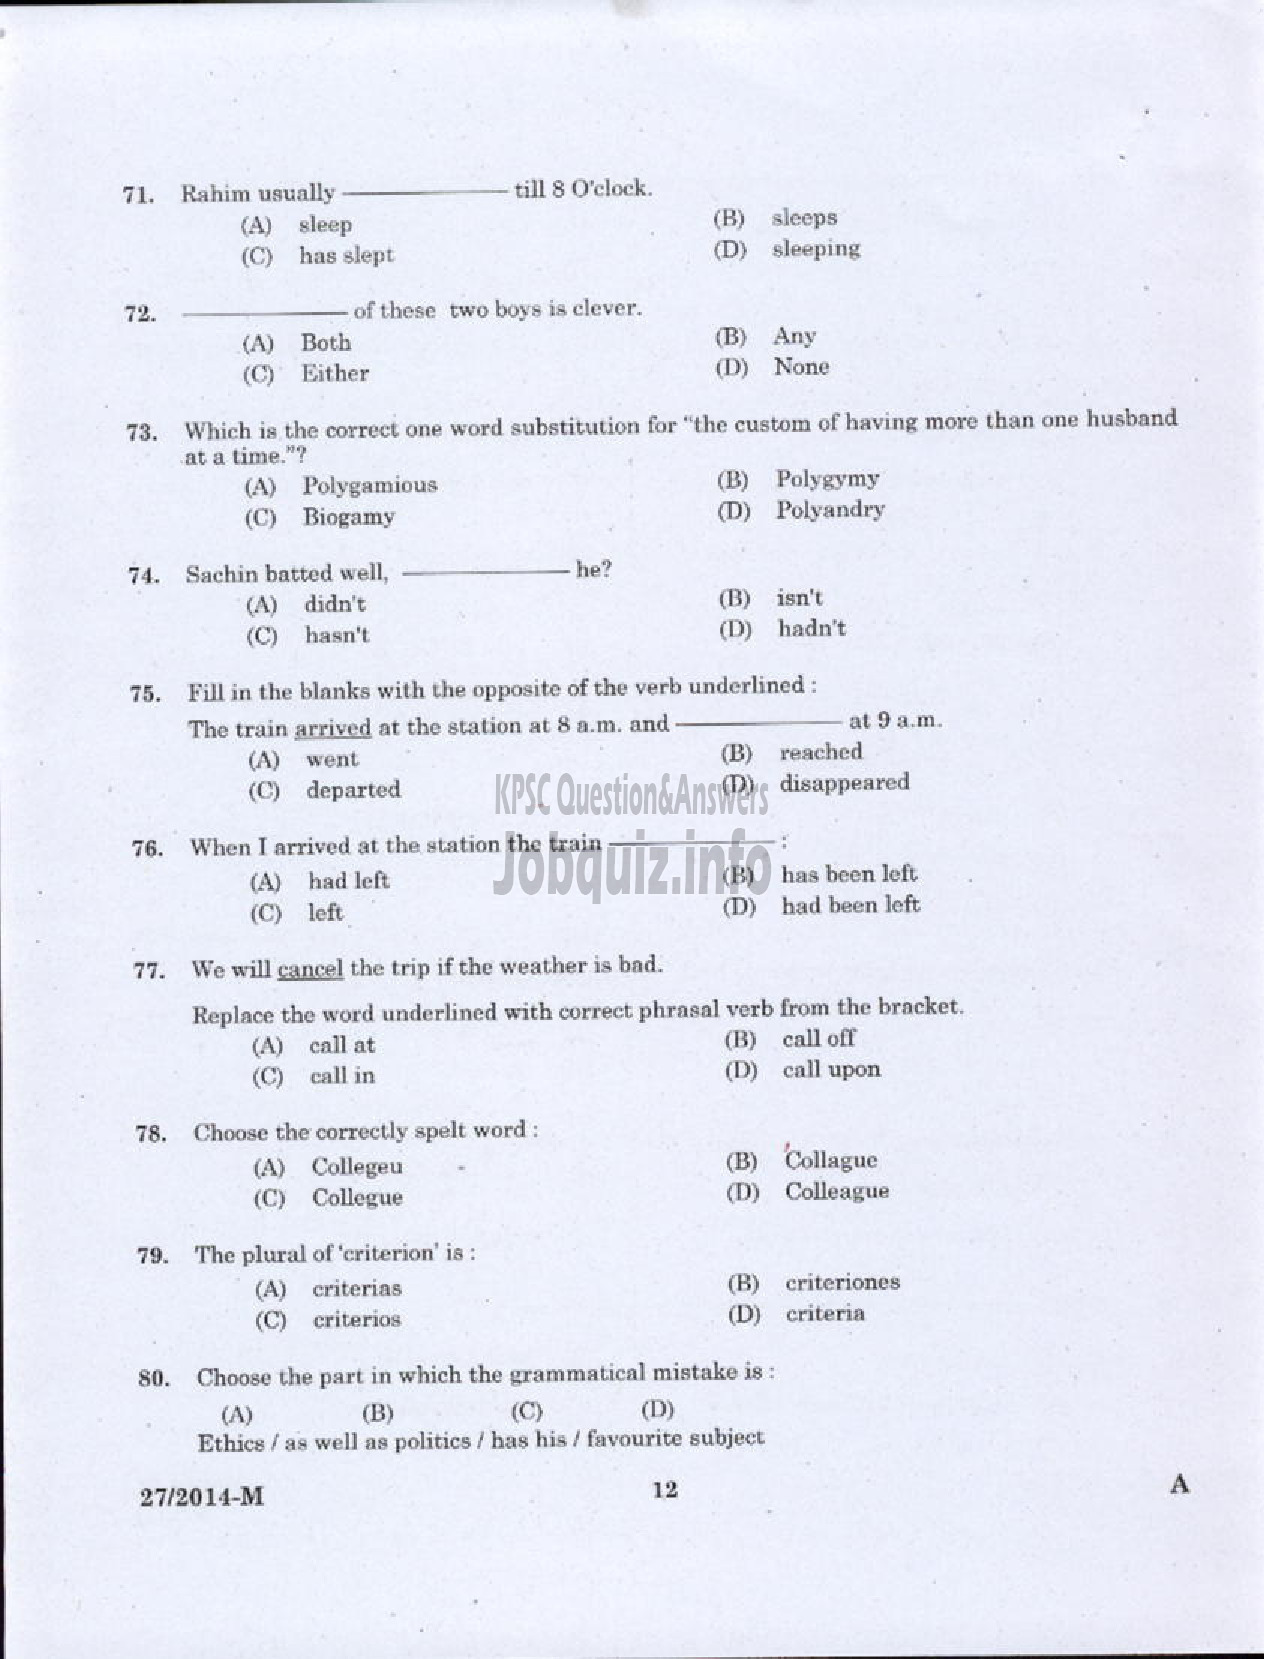 Kerala PSC Question Paper - LOWER DIVISION CLERK 2014 VARIOUS BY TRANSFER ( Malayalam ) -10